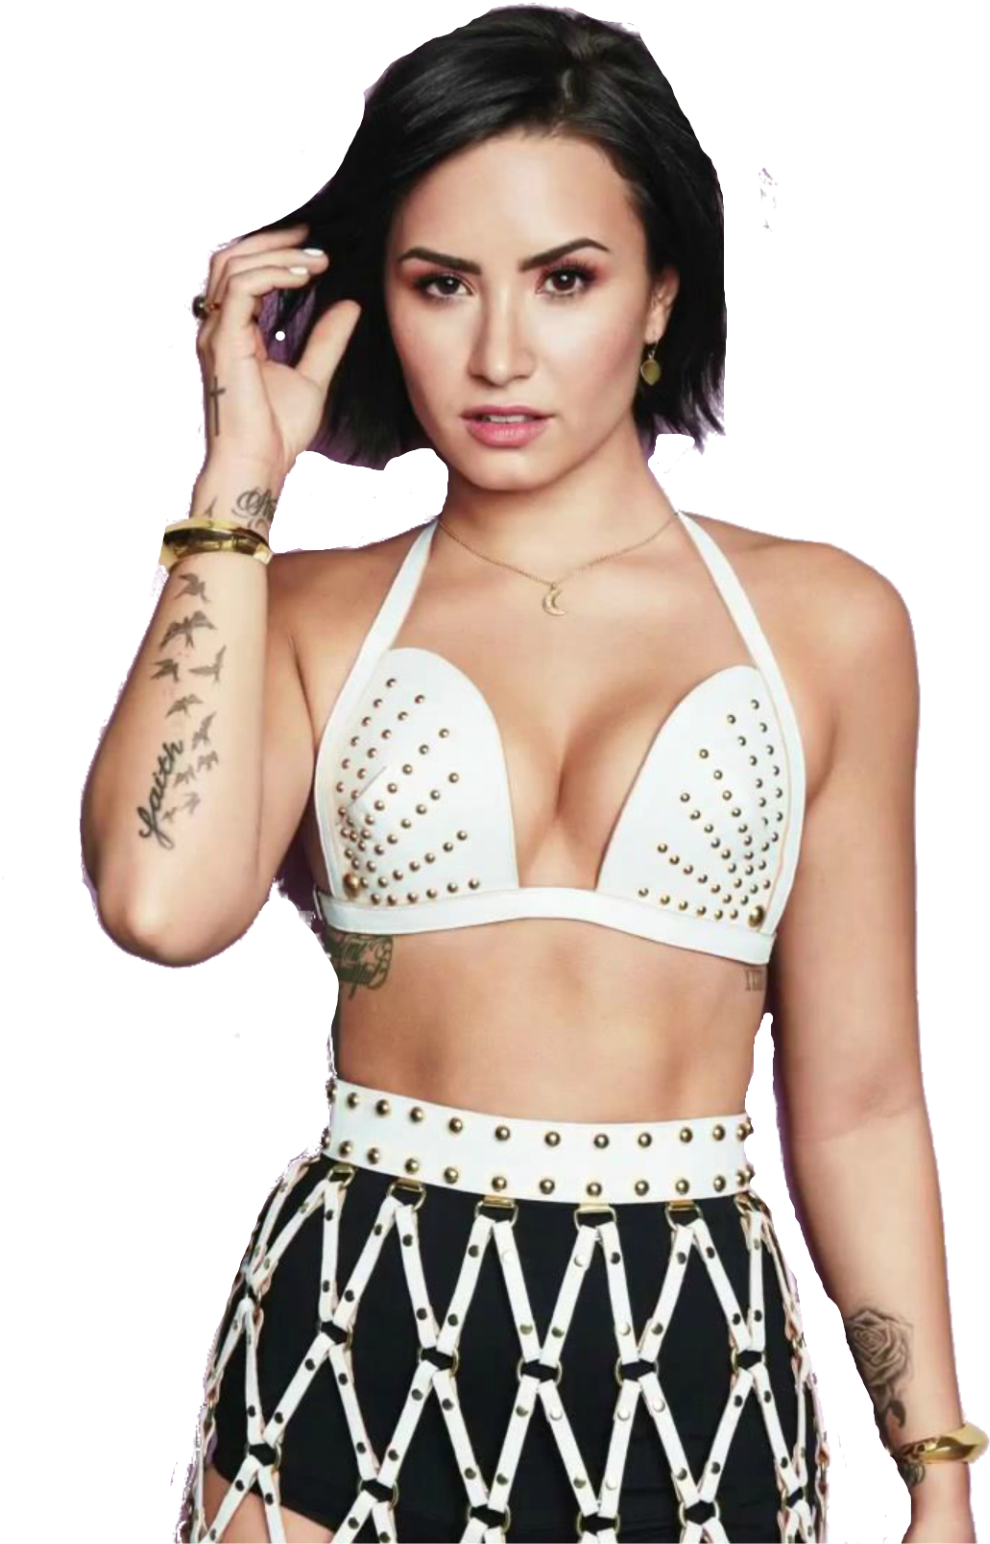 Popstar_in_ Studded_ Outfit.png PNG image